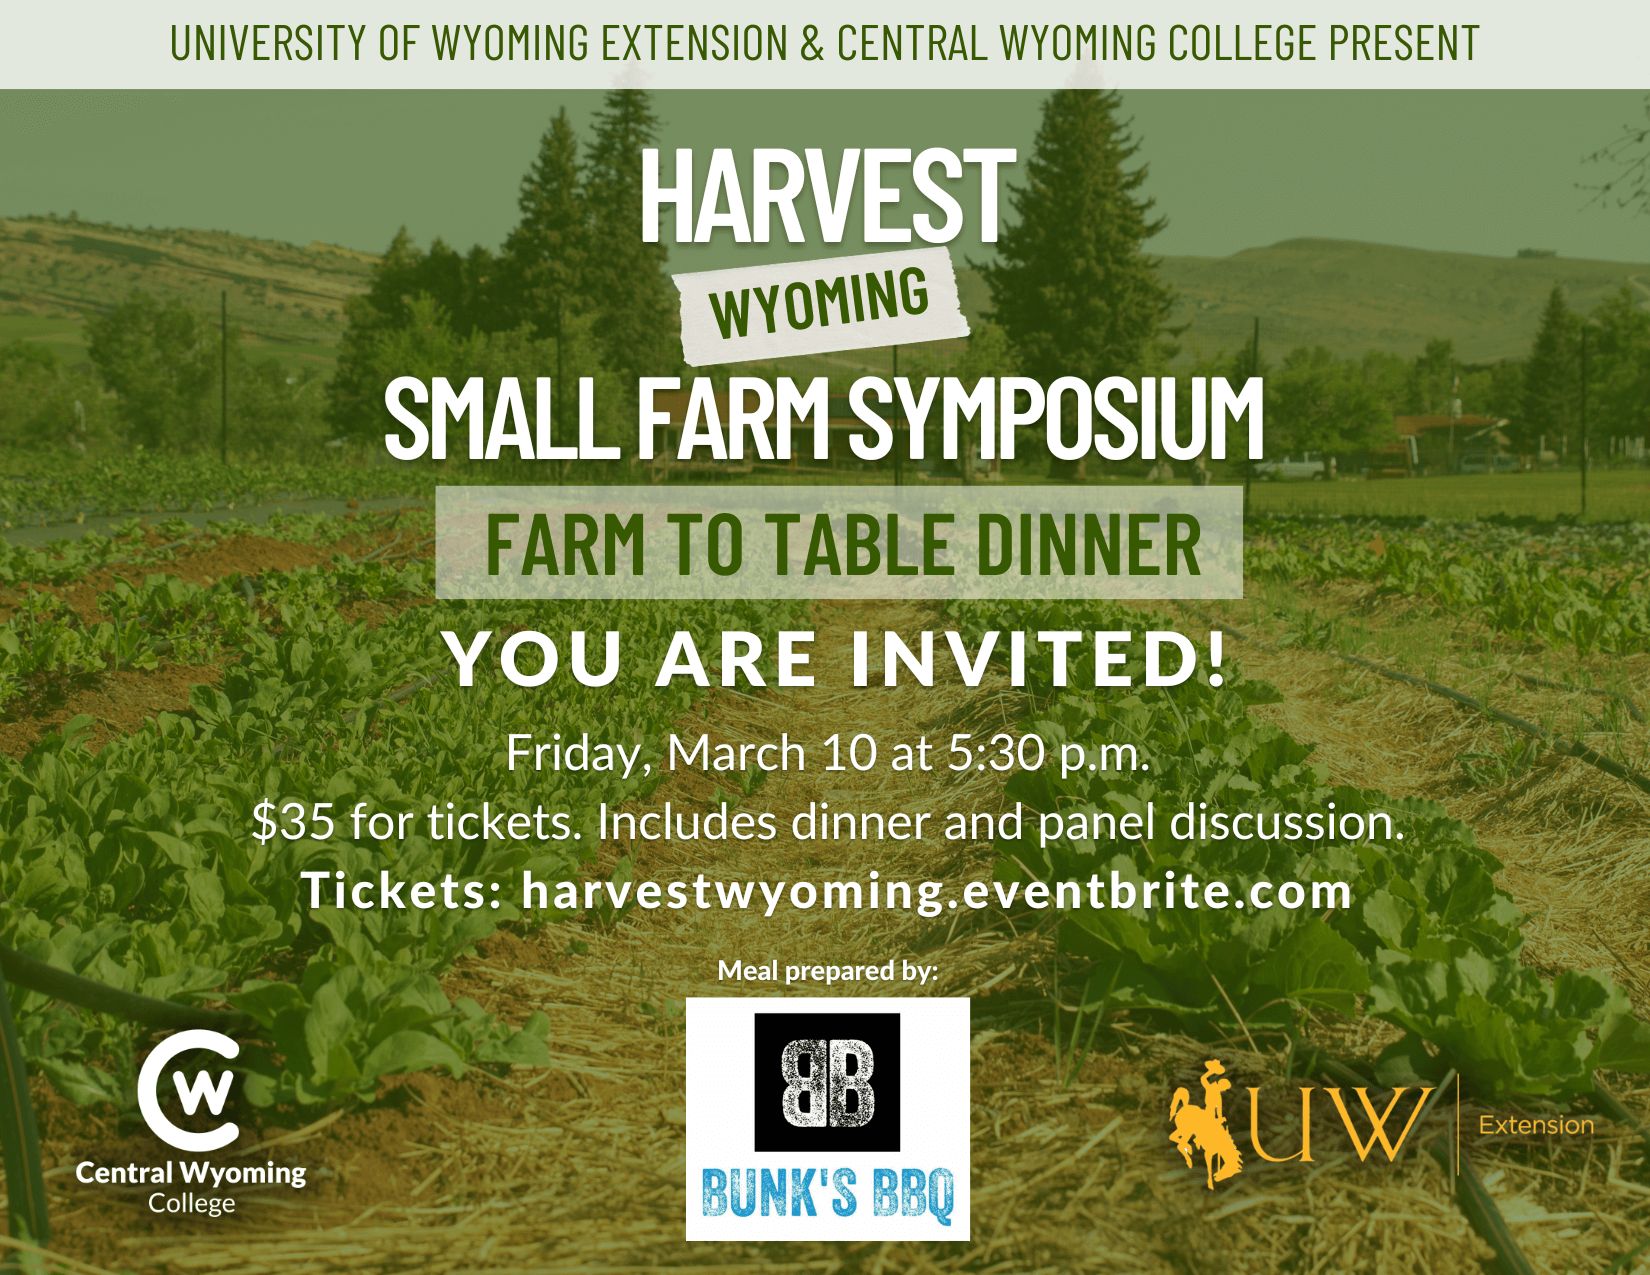 Promotional postcard for Harvest Wyoming Small Farm Symposium featuring a Farm to Table Dinner event presented by University of Wyoming Extension and Central Wyoming College, with meal preparation by Bunk's BBQ.